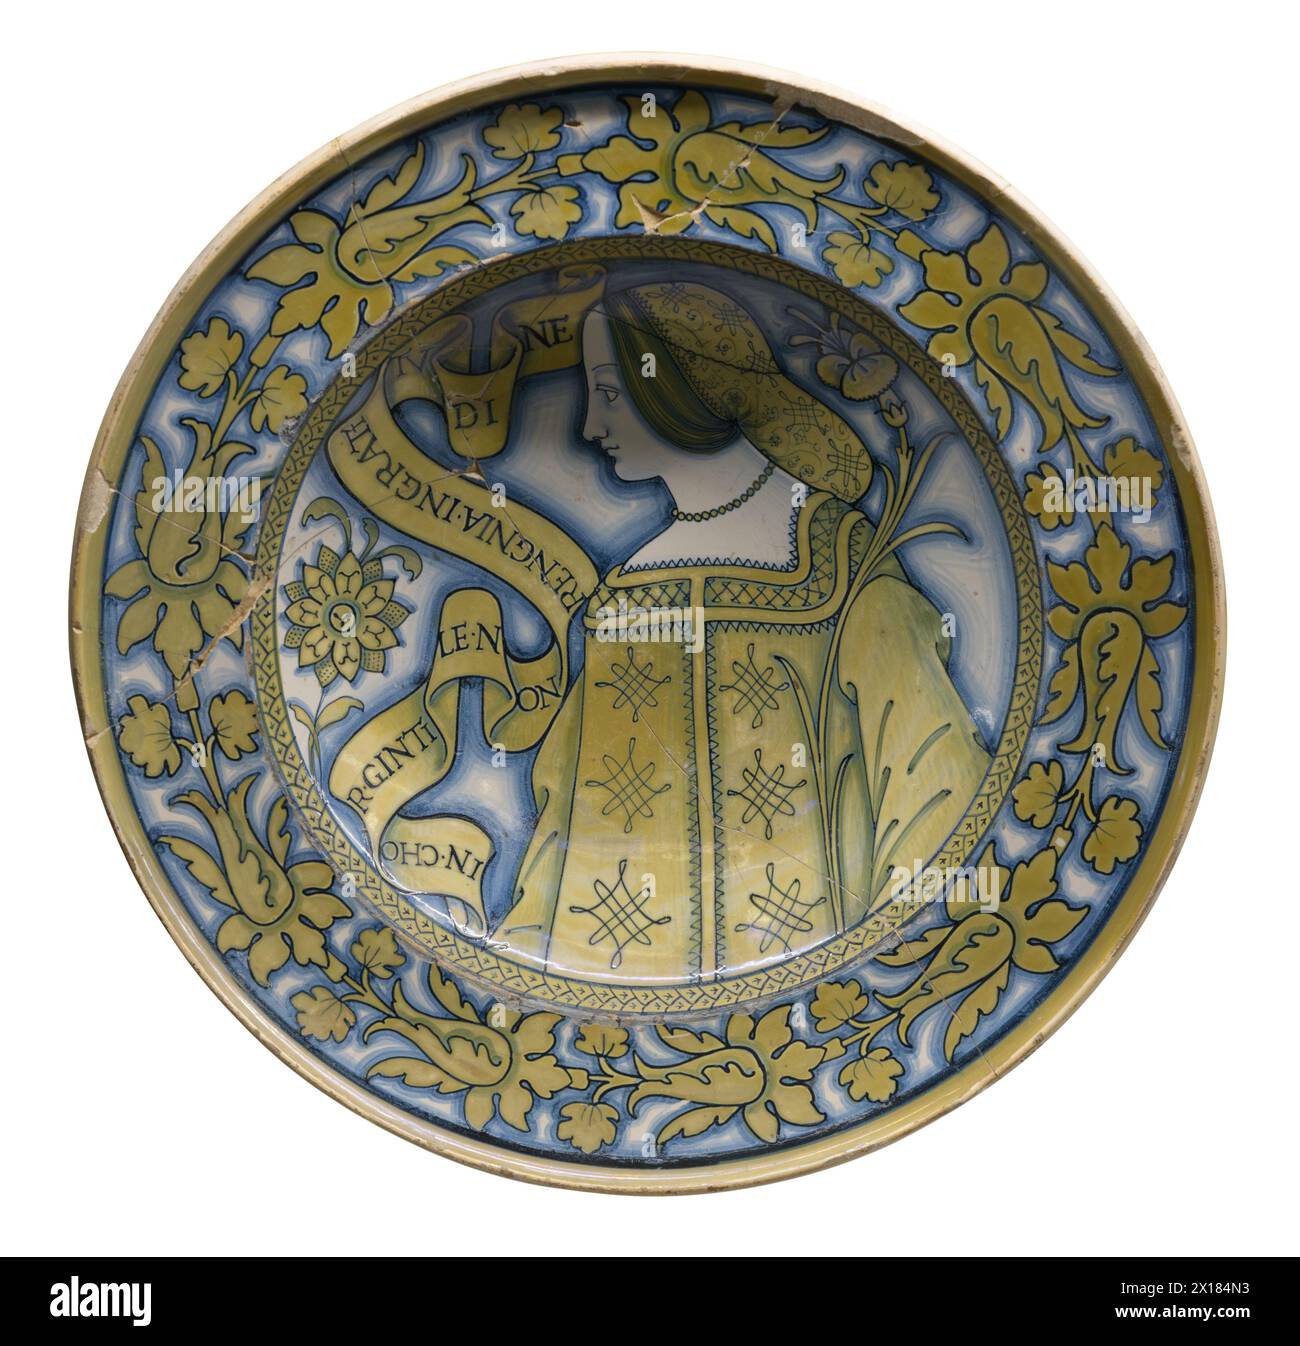 'Bella donna' maiolica charger plate with a female portrait.  Ravenna, Italy Stock Photo